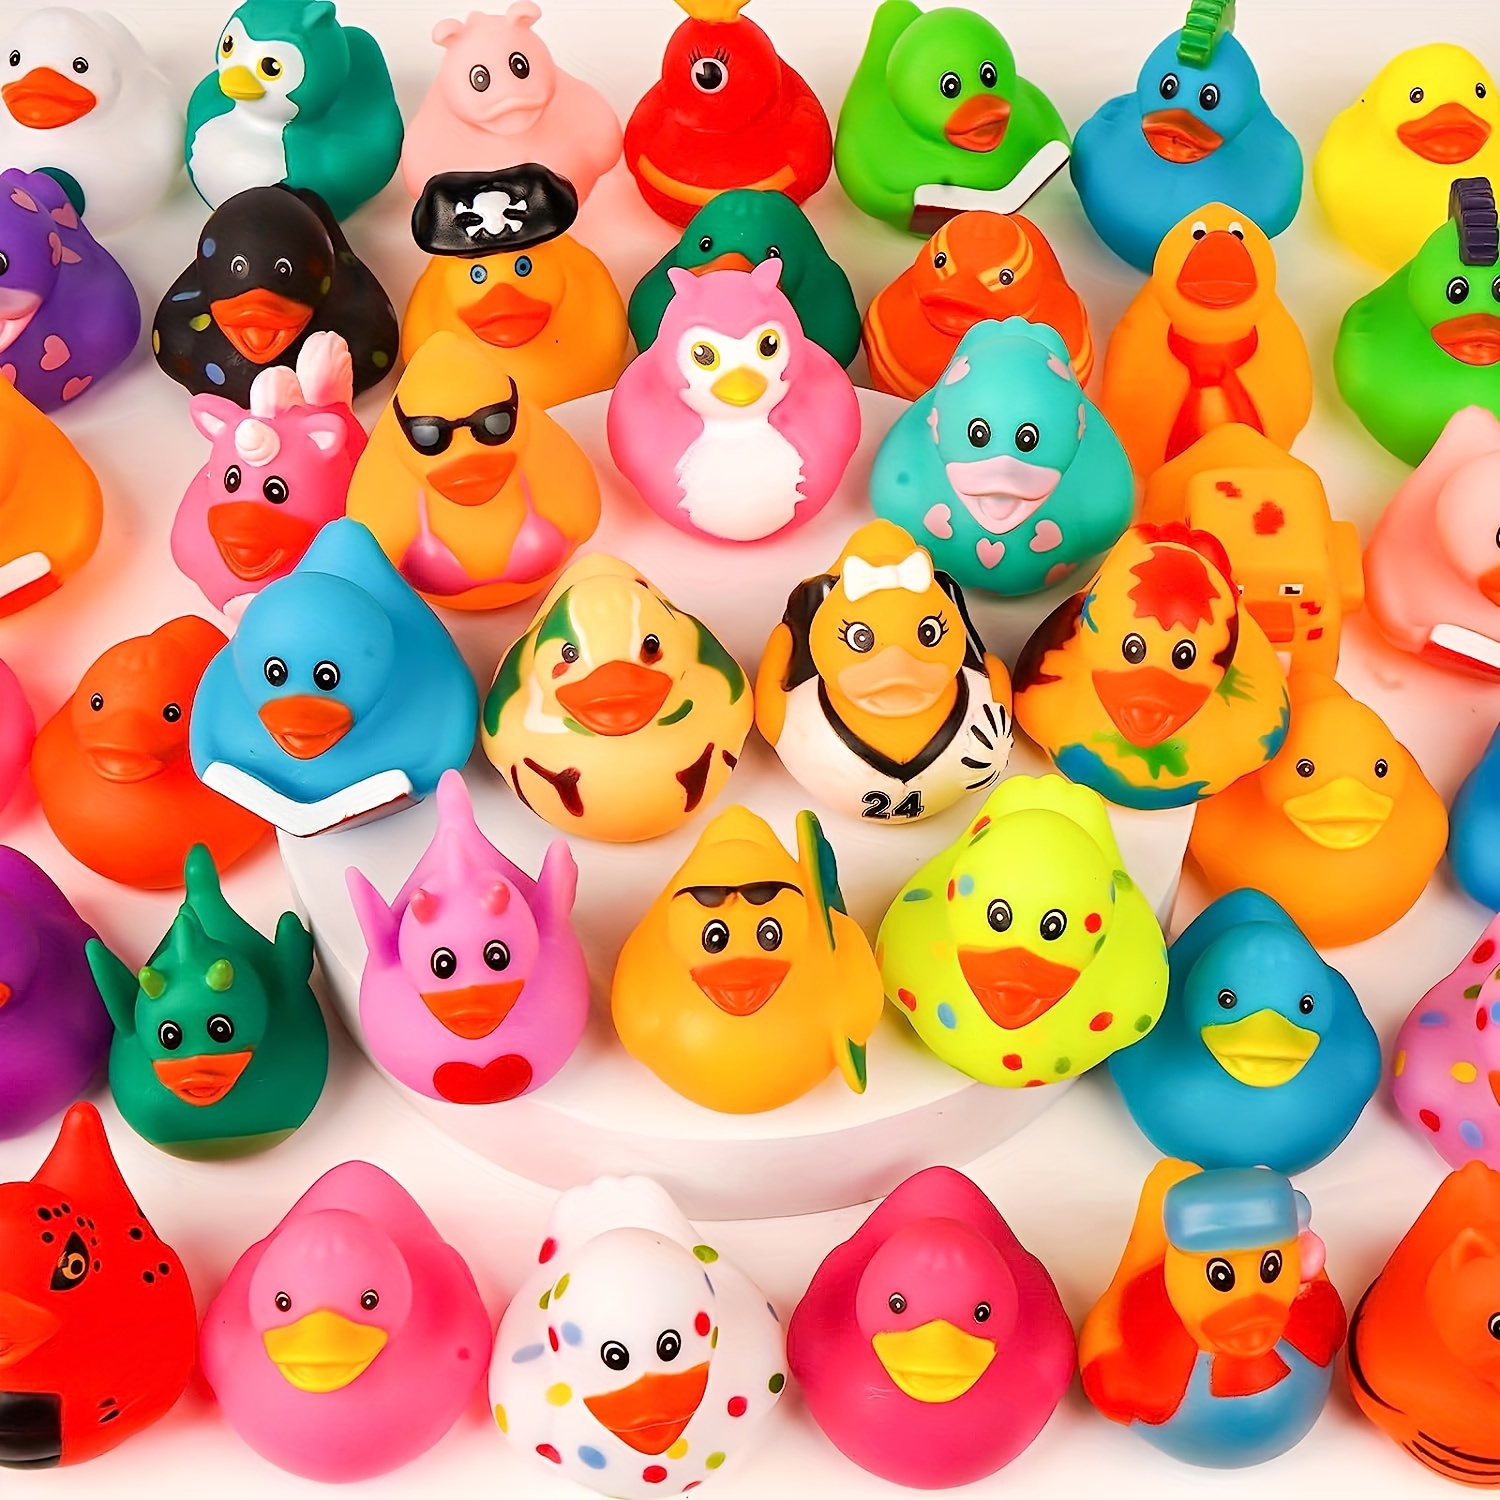 Halovin 50Pcs Christmas Rubber Ducks for Boys, Girls, Kids and  Toddlers,Christmas Ducks for Jeeps Ducking, Xmas Themed Duck Bathtub Pool  Toys